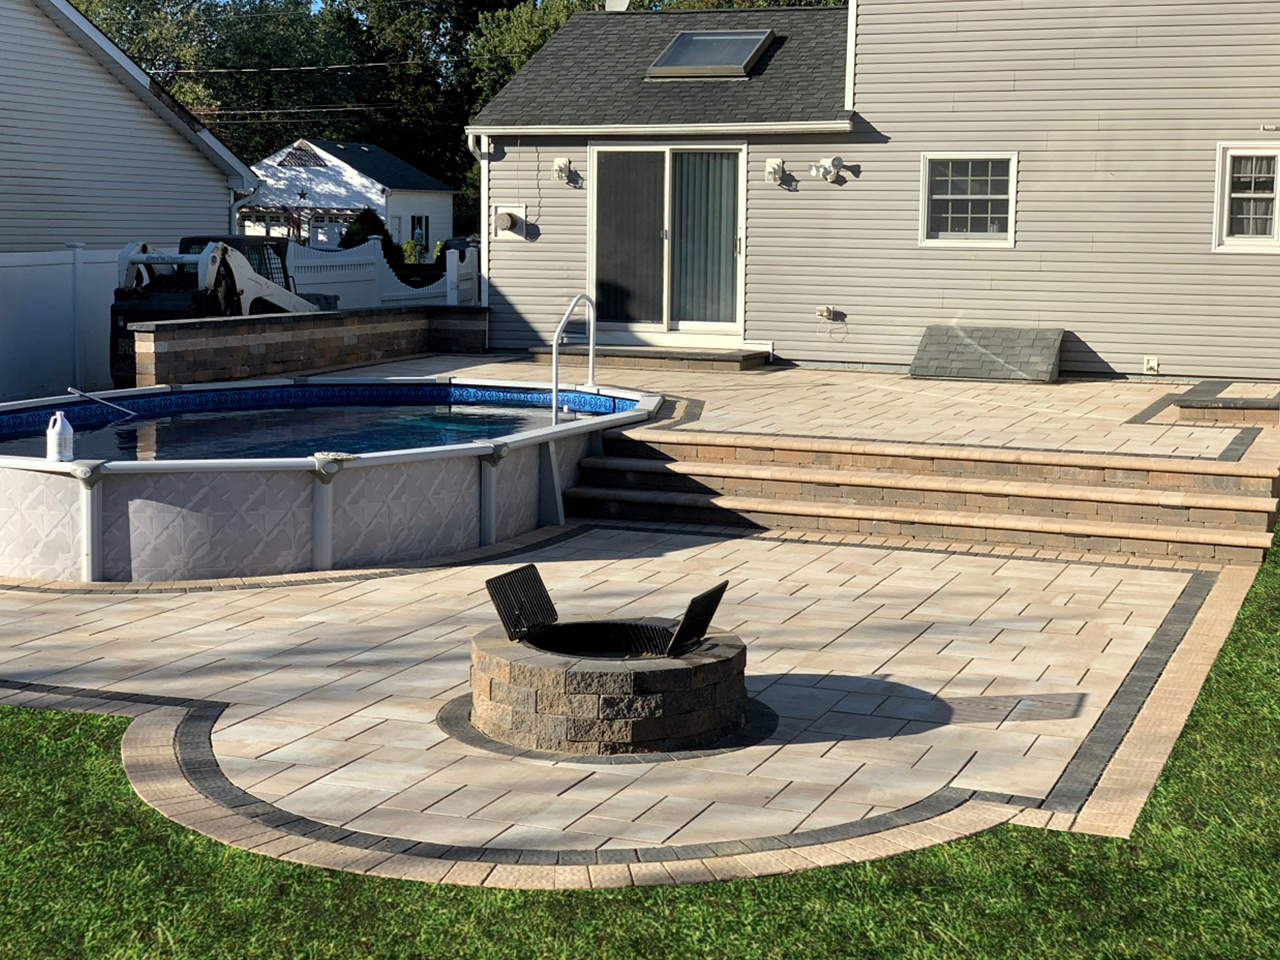 A meticulously constructed fire pit installation by Affordable Patio, showcasing their attention to detail and quality workmanship